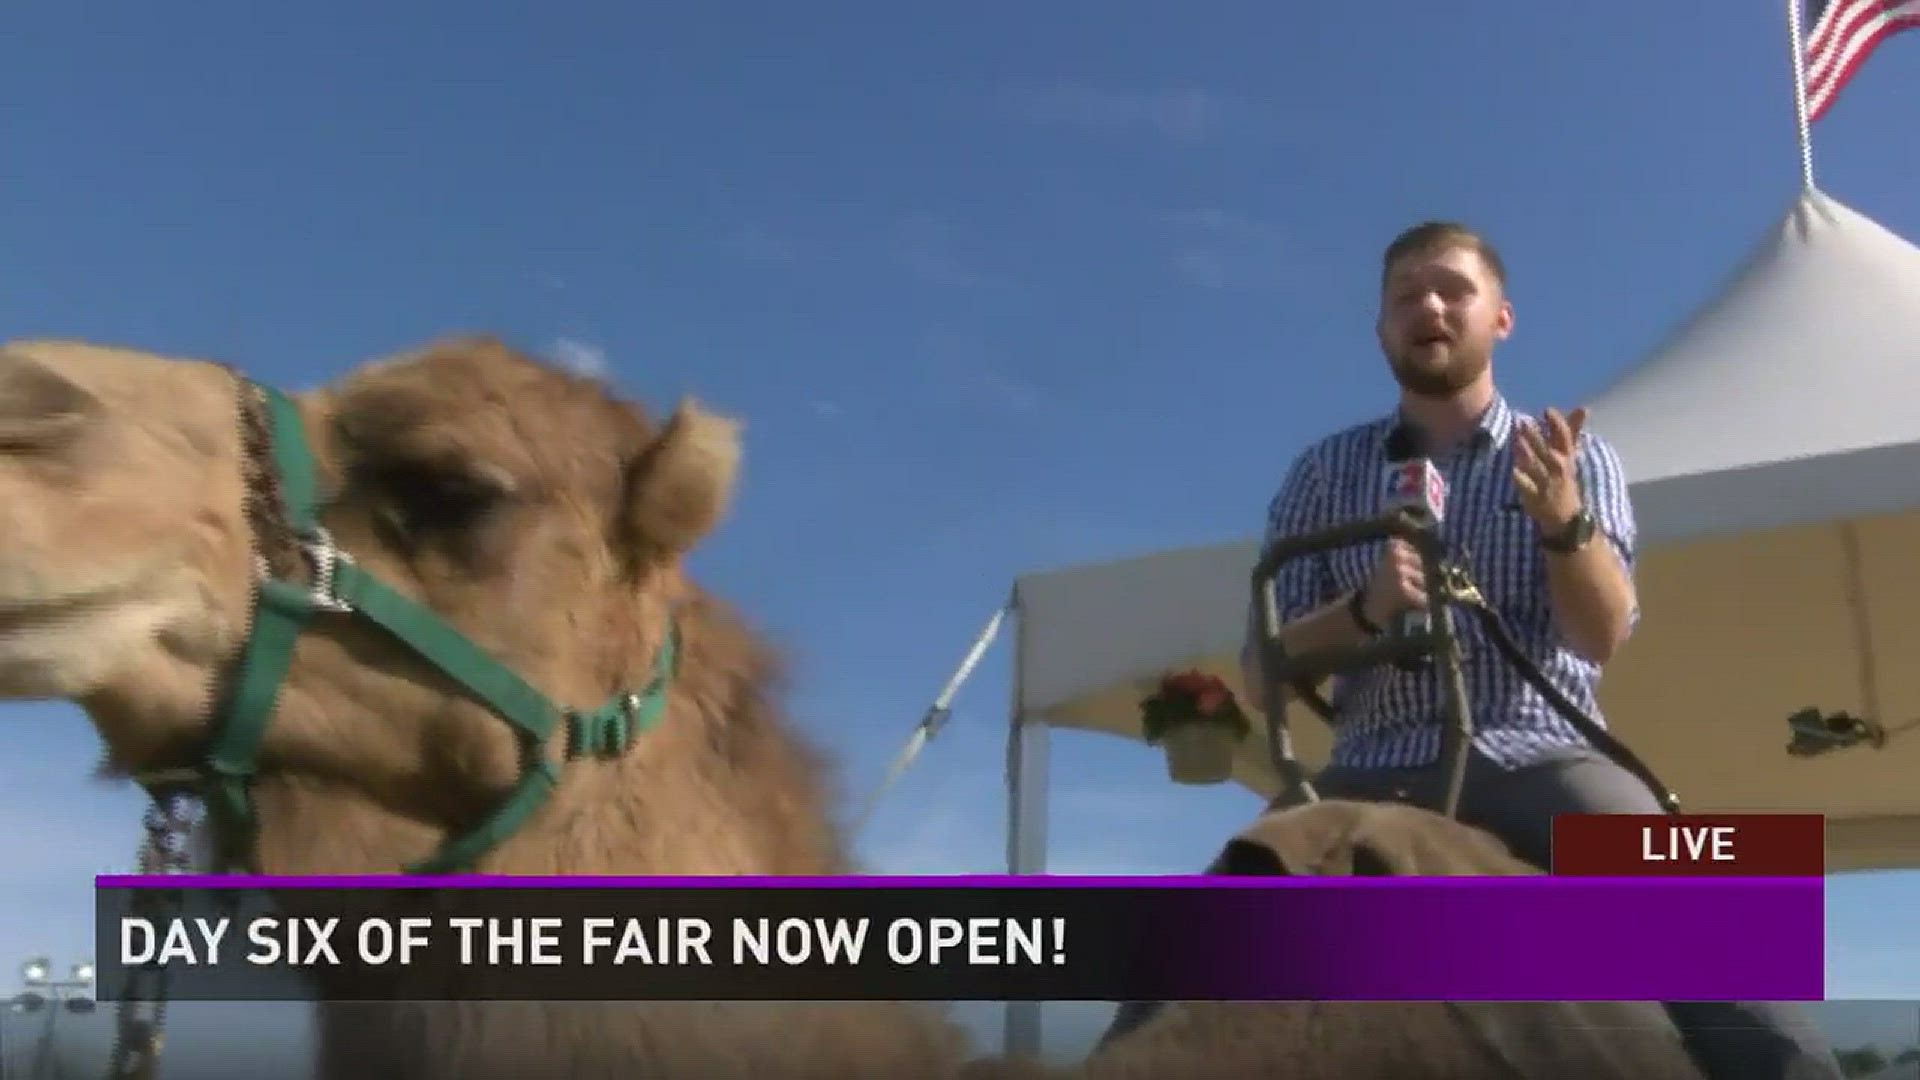 12News' Royden Ogletree and Gumby the camel at the SouthTexas State Fair